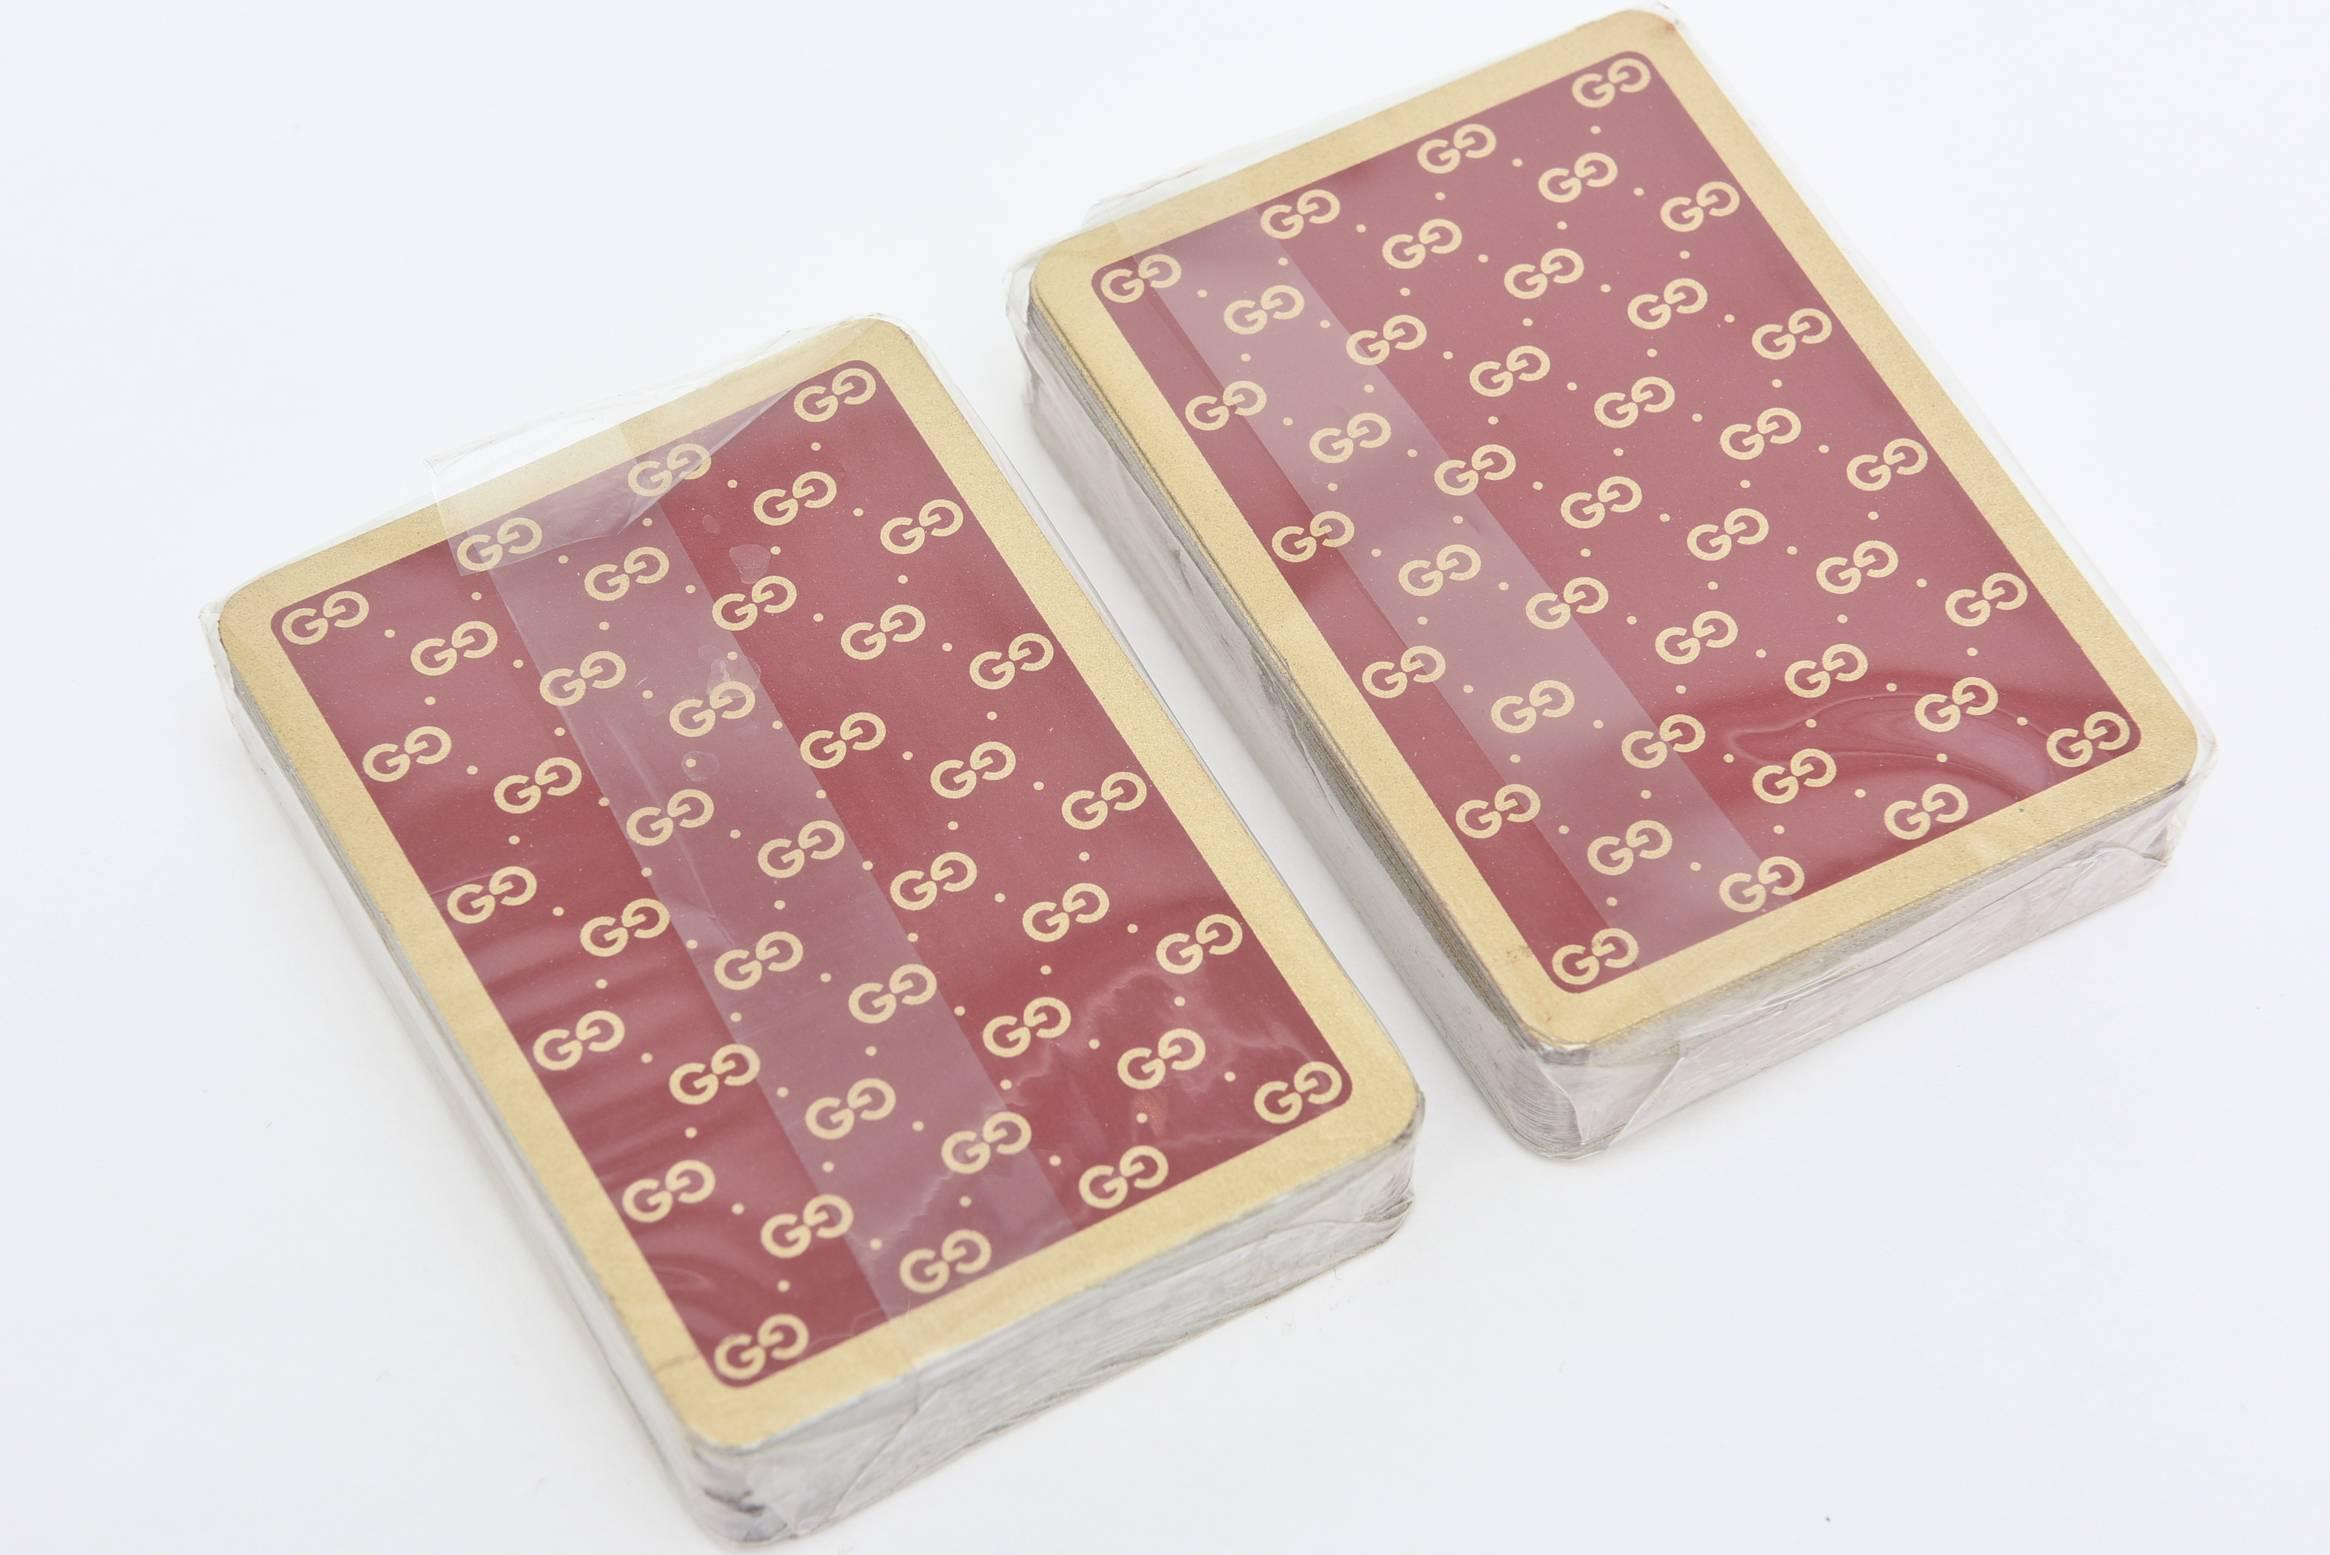 gucci deck of cards